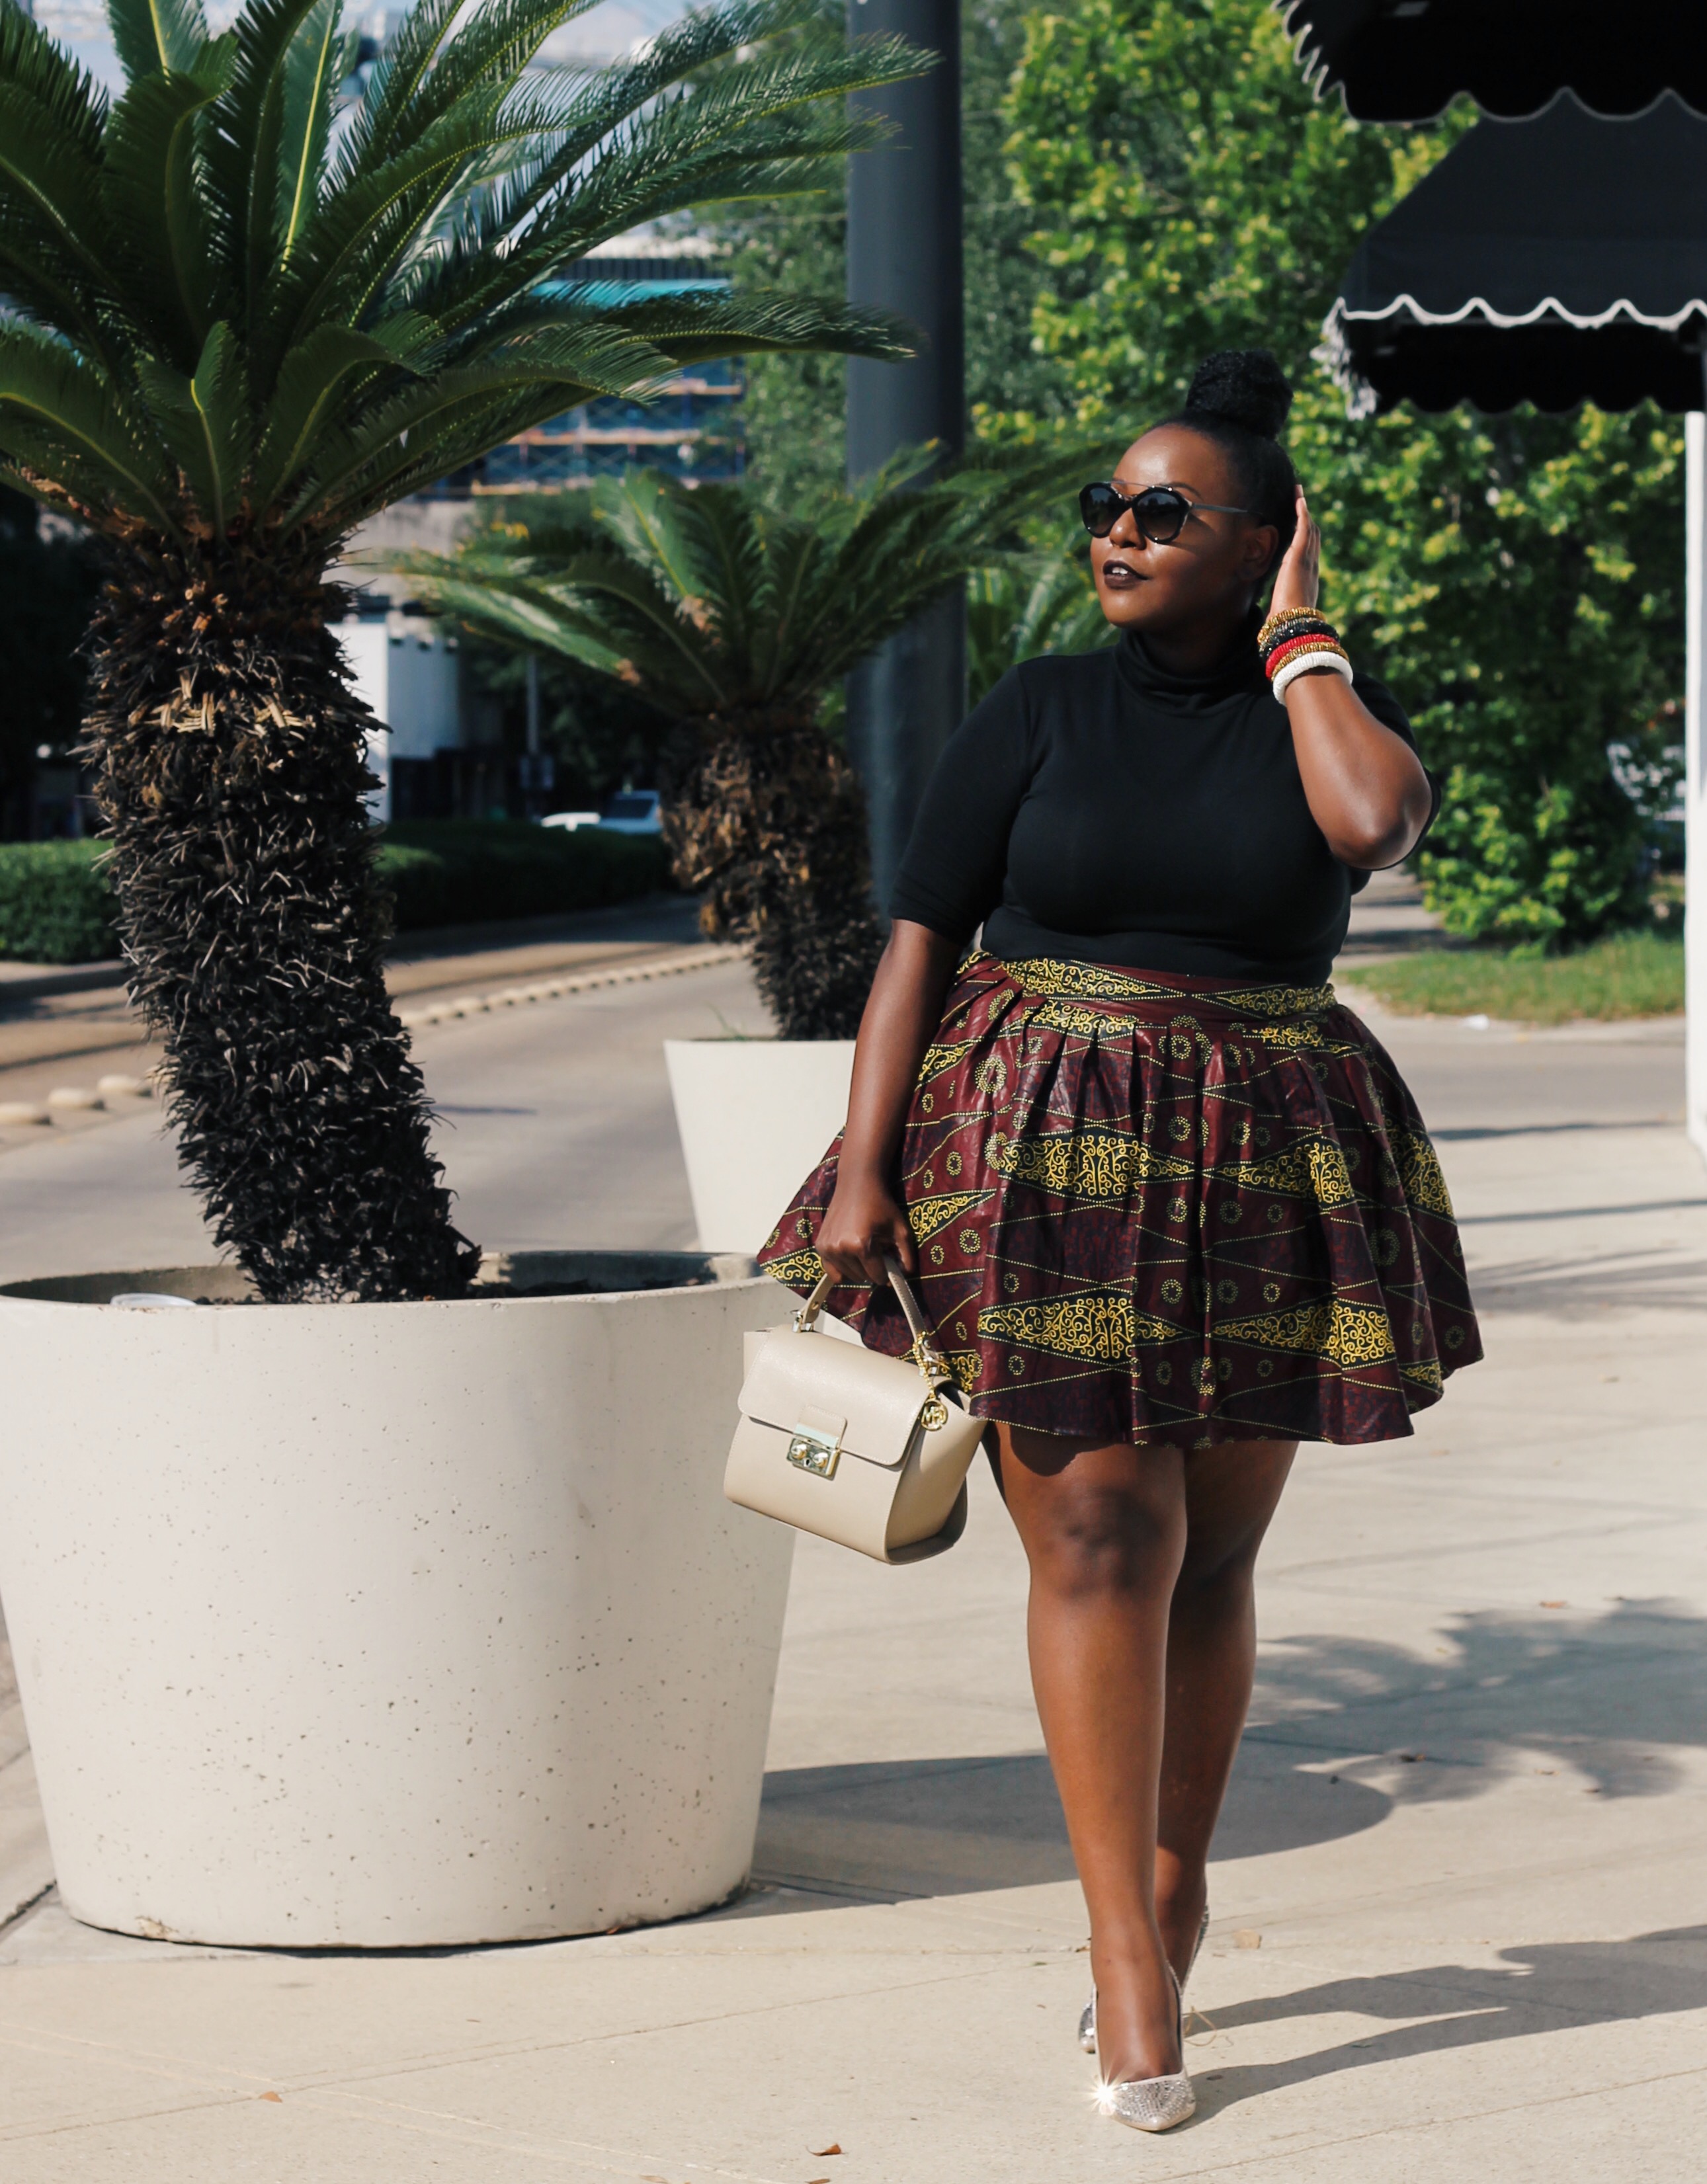 afro pop, asos curve bloggers, beautiful curvy girls, curvy style dark skin fashion blogger curvy style blogger, dark skin beauty blogger, dark skin blogger, houston blogger, inspiration for 2016, inspiring bloggers and blogs, new years resolutions, plus size blogger, quotes for 2016, relationship advice blogs, rules to live by in the new year, texas blogger, travel blogger, ugandan blogger, ugandan fashionista, ugandan style blogger, african print ankara skirt styles, where to get african print clothes in America and uk, exposure african crafts in kampala uganda, kyaligonza kampala african material